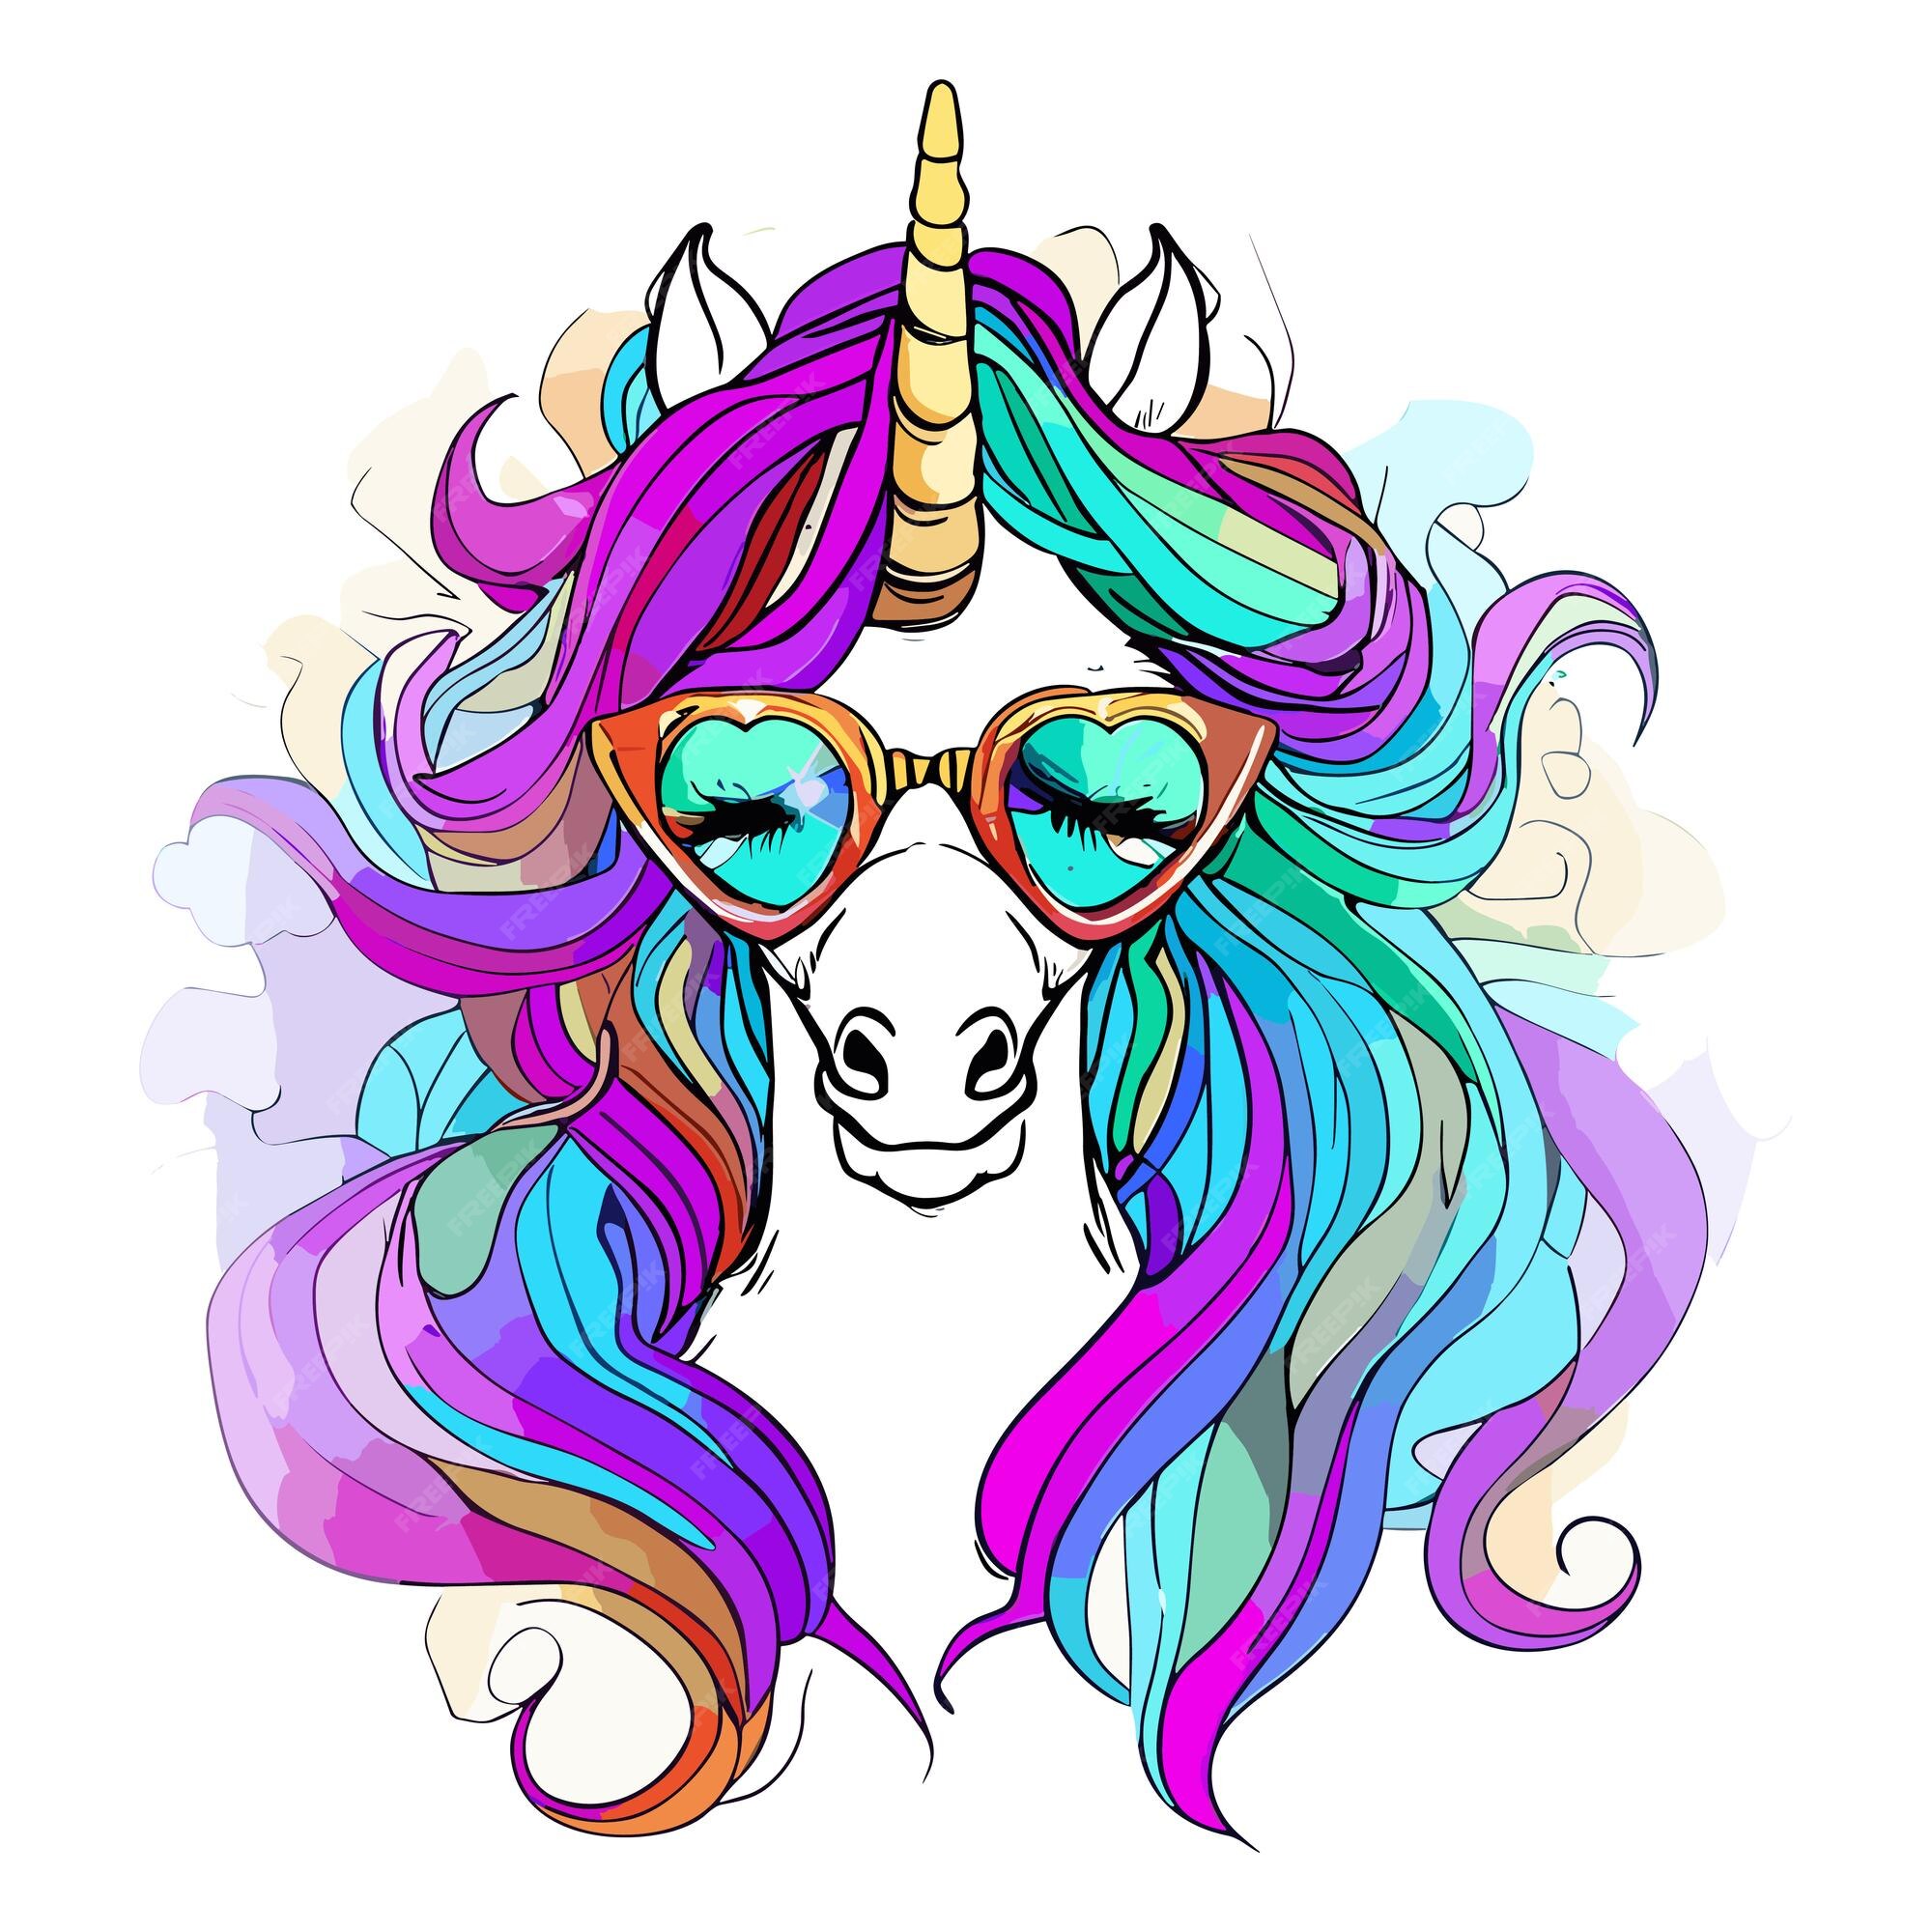 cristal a fairburn recommends unicorn and chill pic